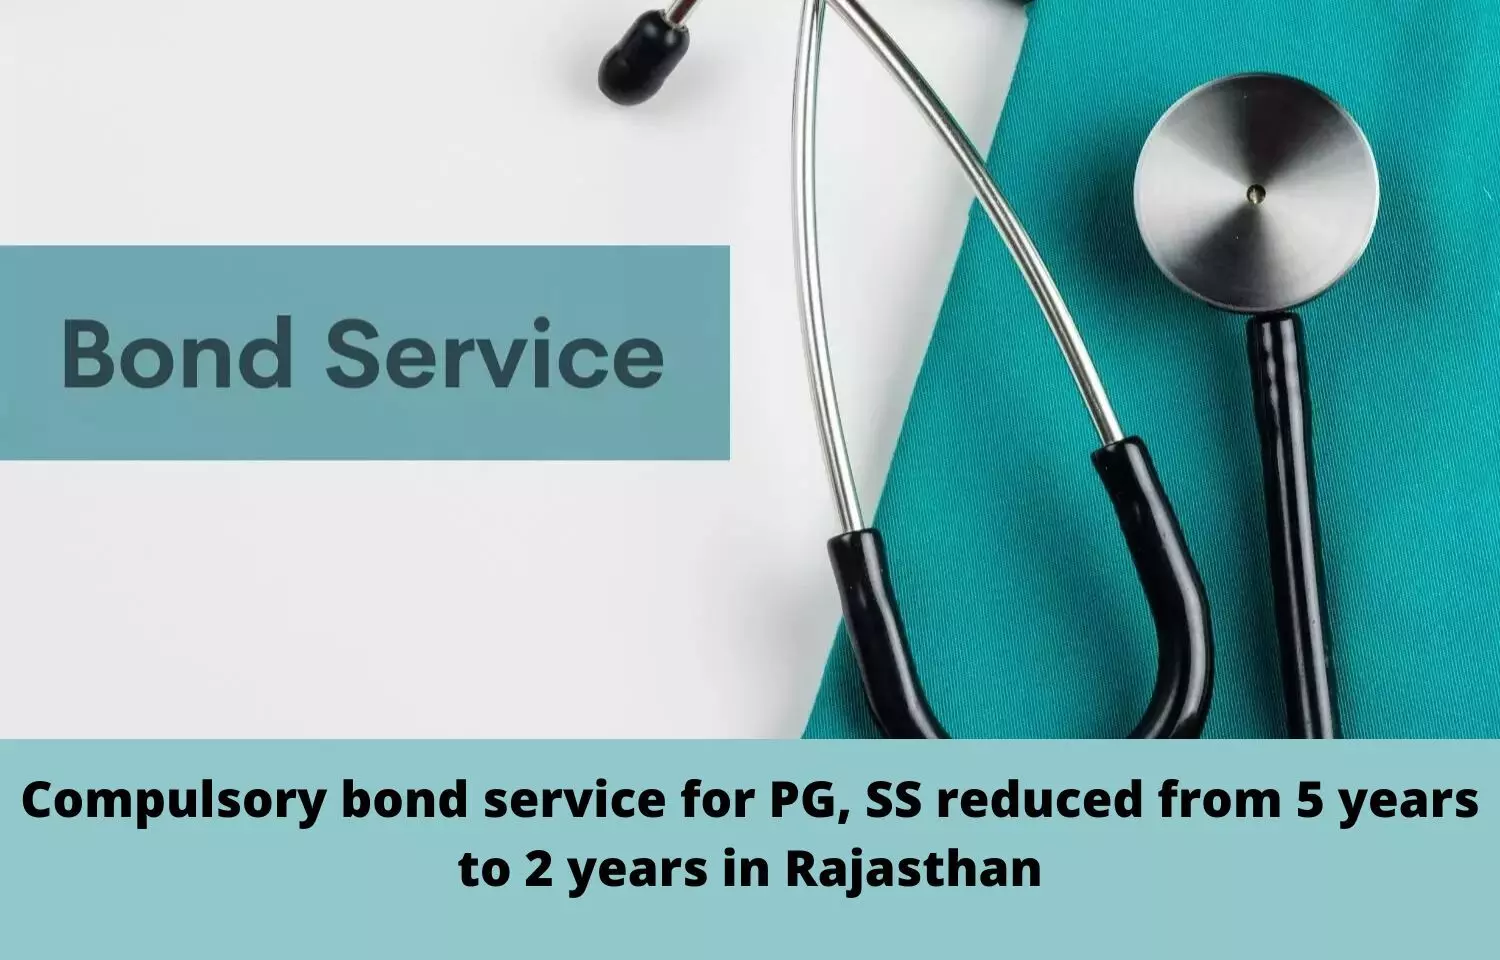 Rajasthan Govt reduces compulsory bond service period for PG, SS from 5 years to 2 years